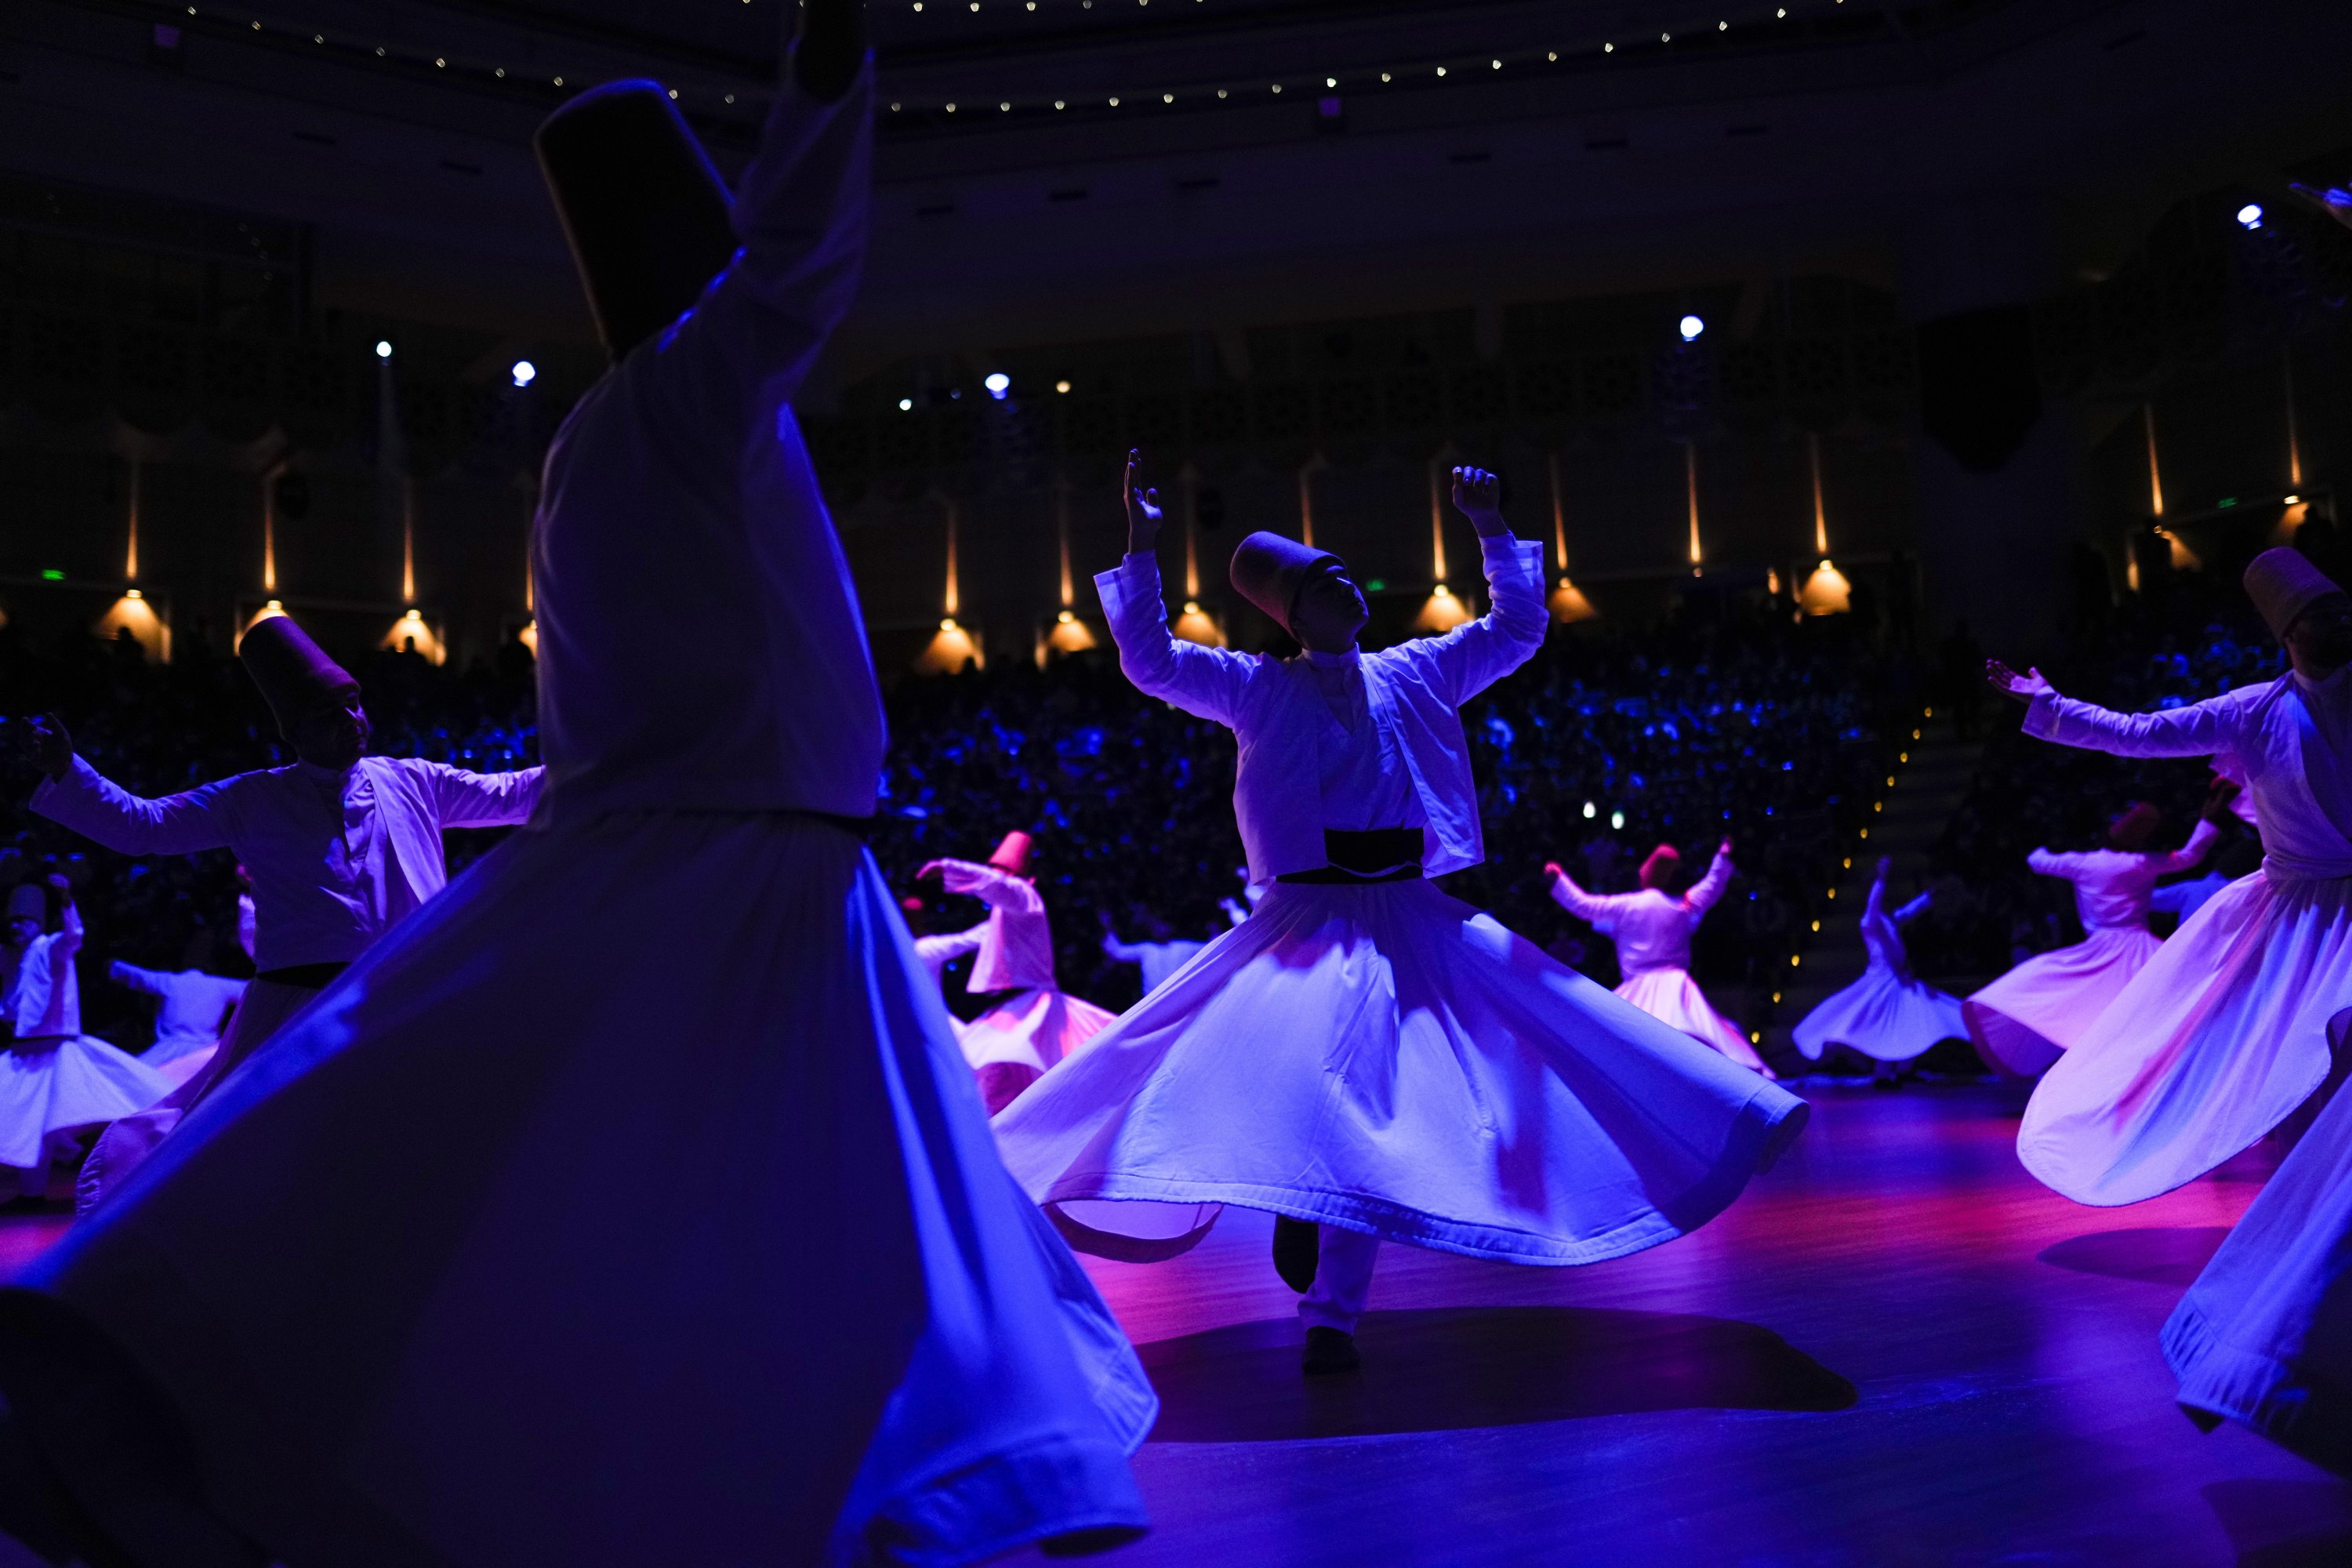 Whirling dervishes of the Mevlevi Order perform during a Sheb-i Arus ceremony in Konya, central Turkey, Dec. 17, 2021. (AP Photo)